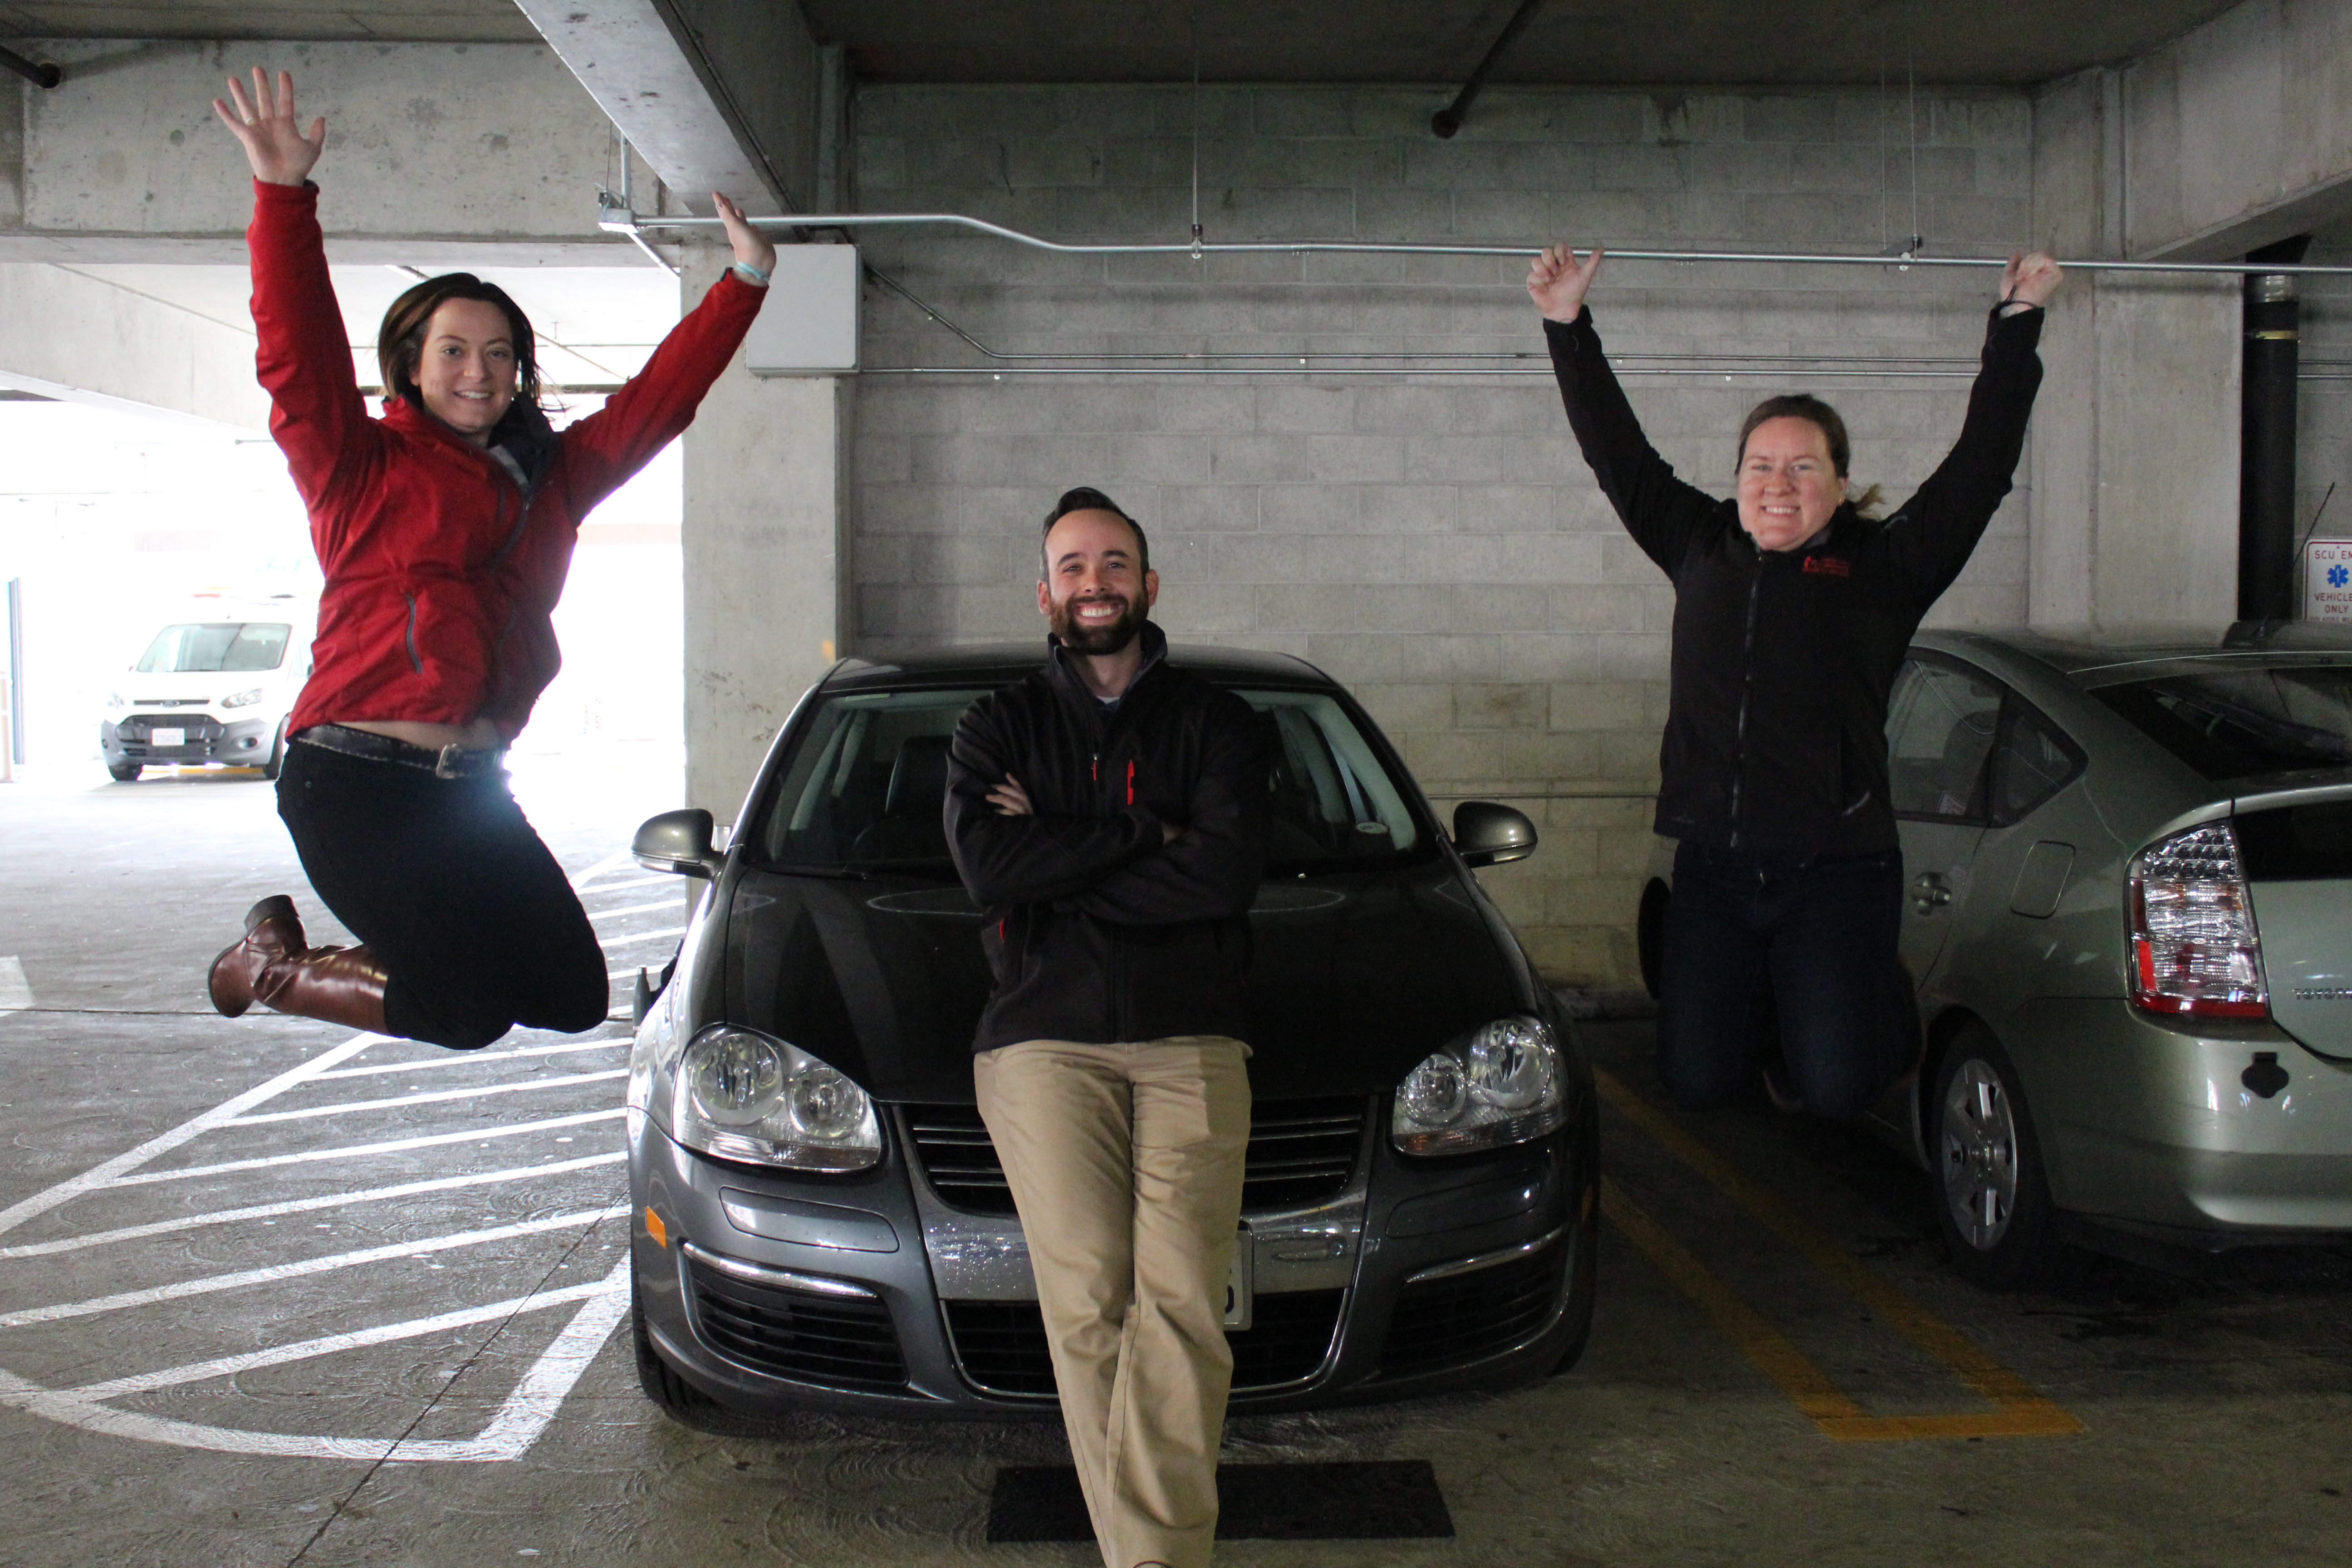 Three SCU employees who carpool together smile next to car